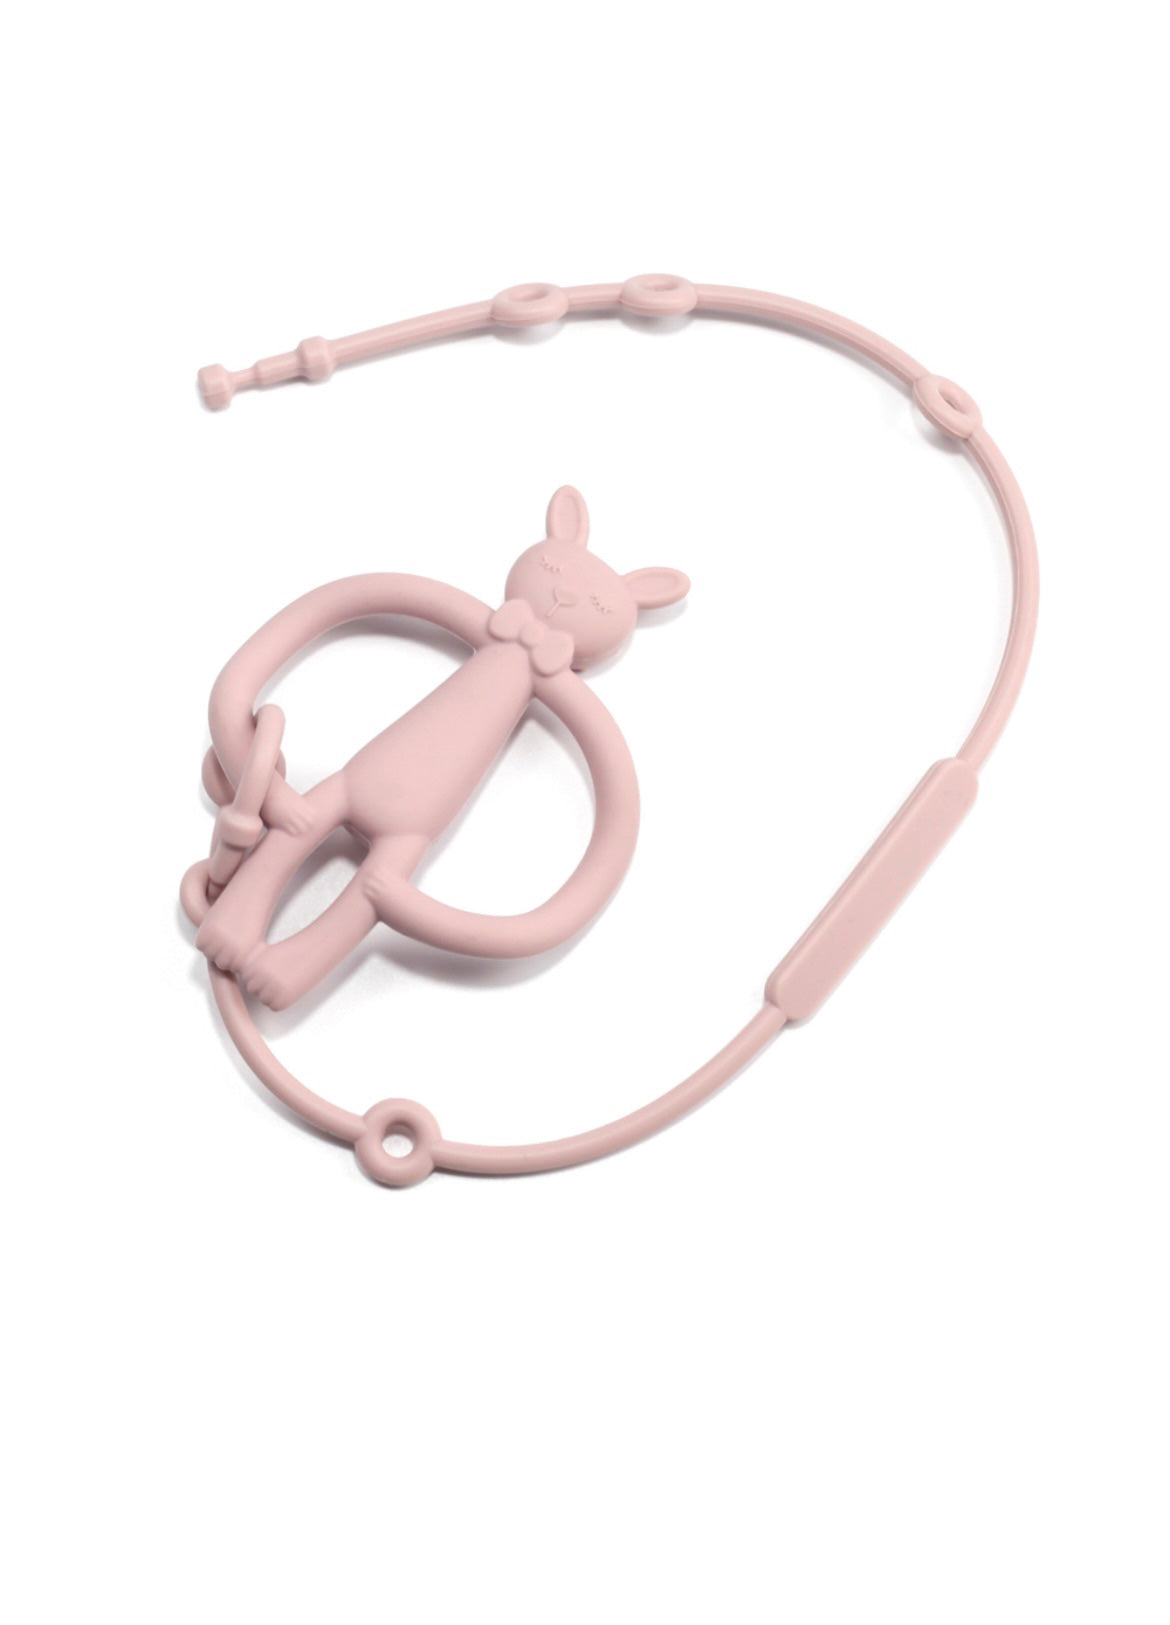 Just Teether- Silicone Strap- Light Mauve